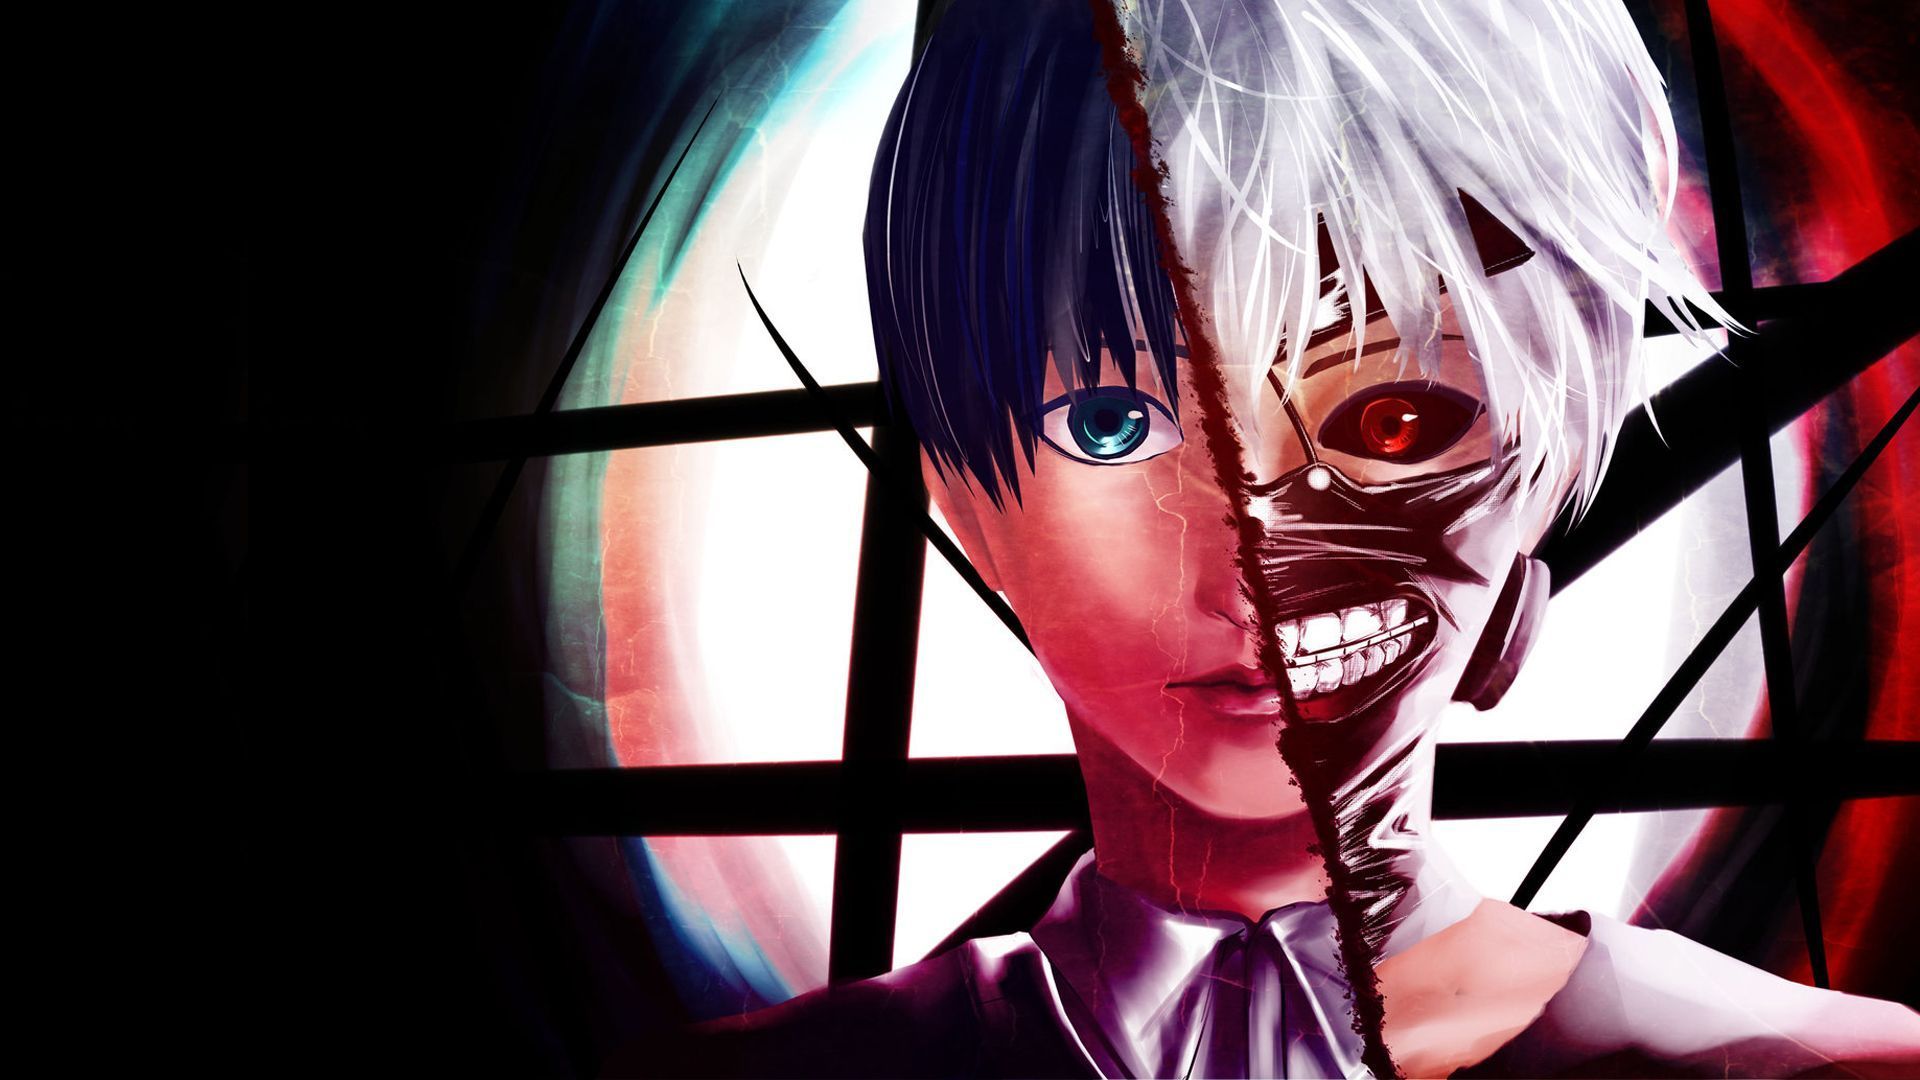 Tokyo Ghoul | HD Wallpapers | Page 3